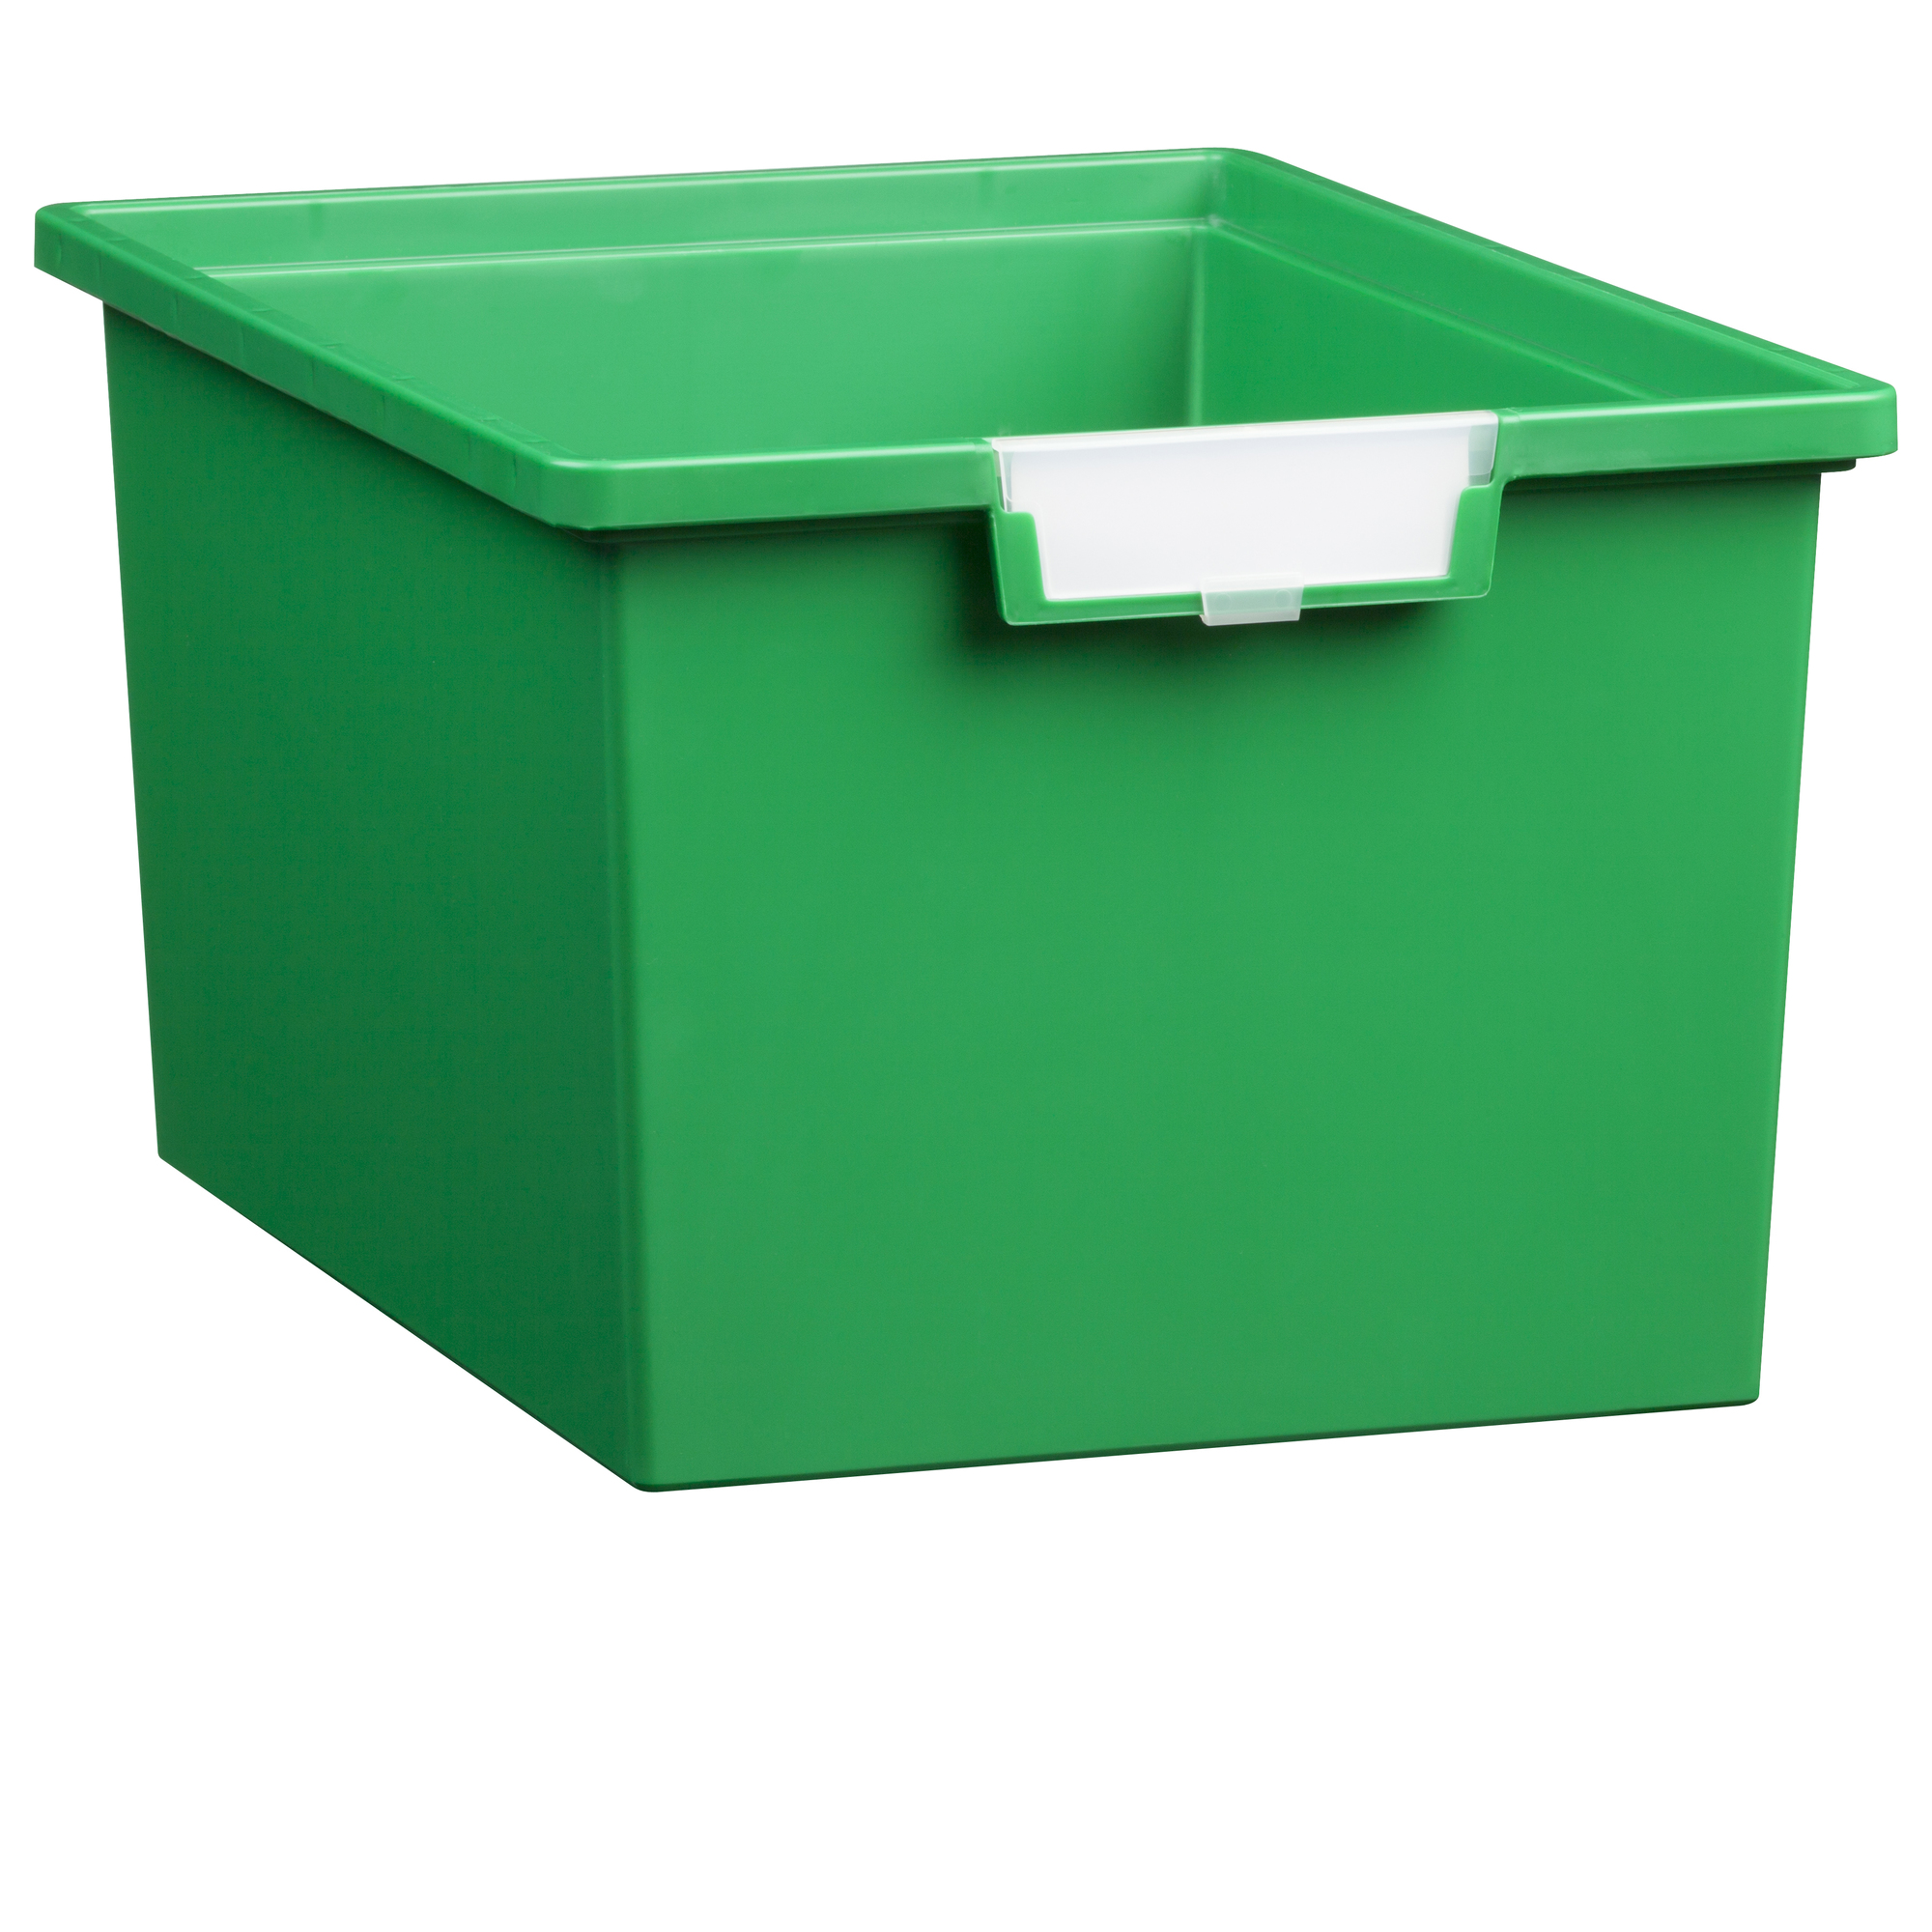 Certwood StorWerks, Slim Line 9Inch Tray in Primary Green-1PK, Included (qty.) 1 Height 9 in, Model CE1953PG1